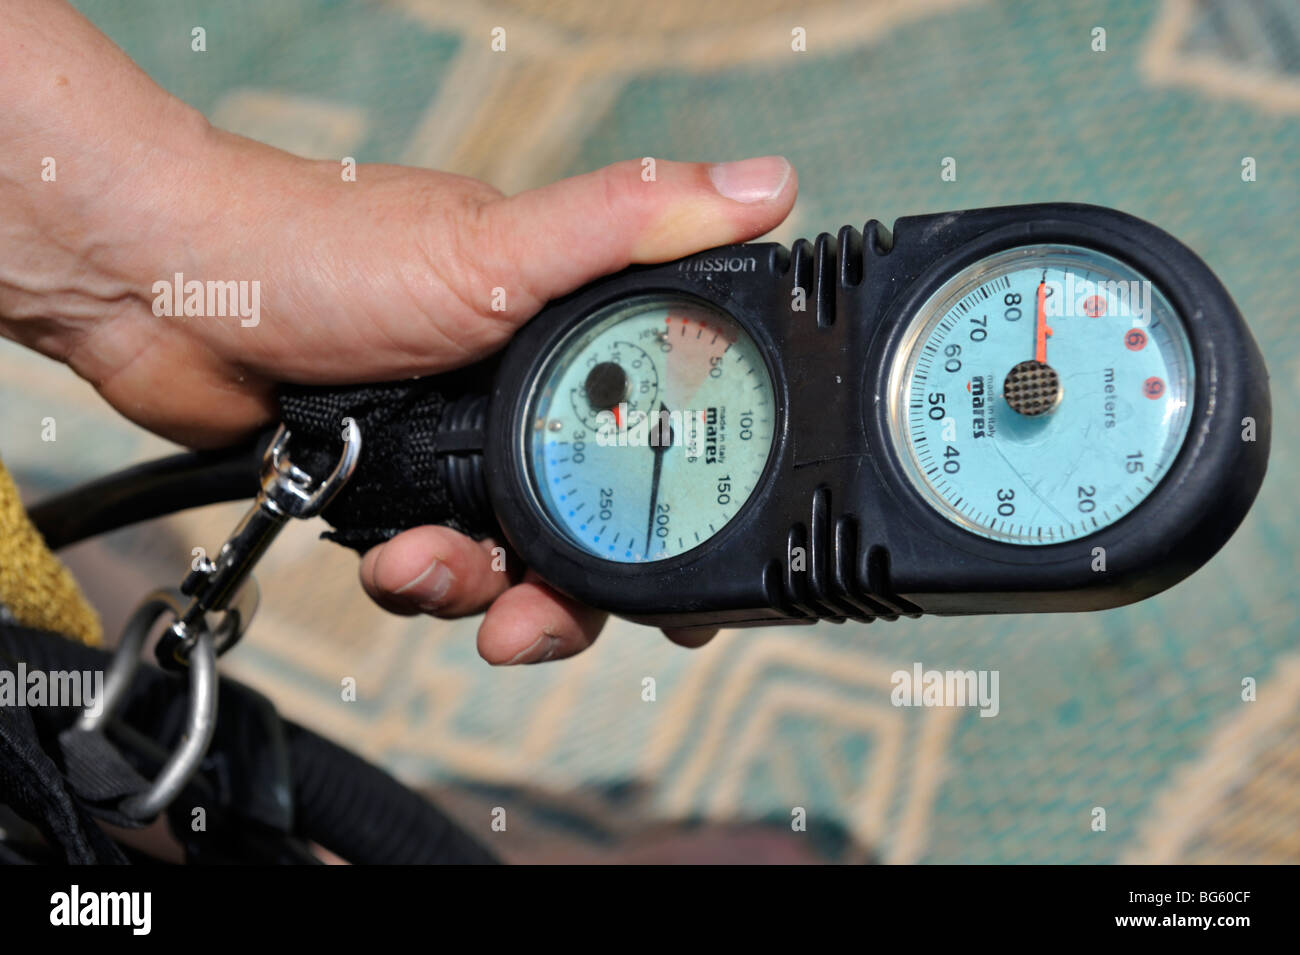 Hand holding scuba diving console with pressure and depth gauge in it Stock Photo